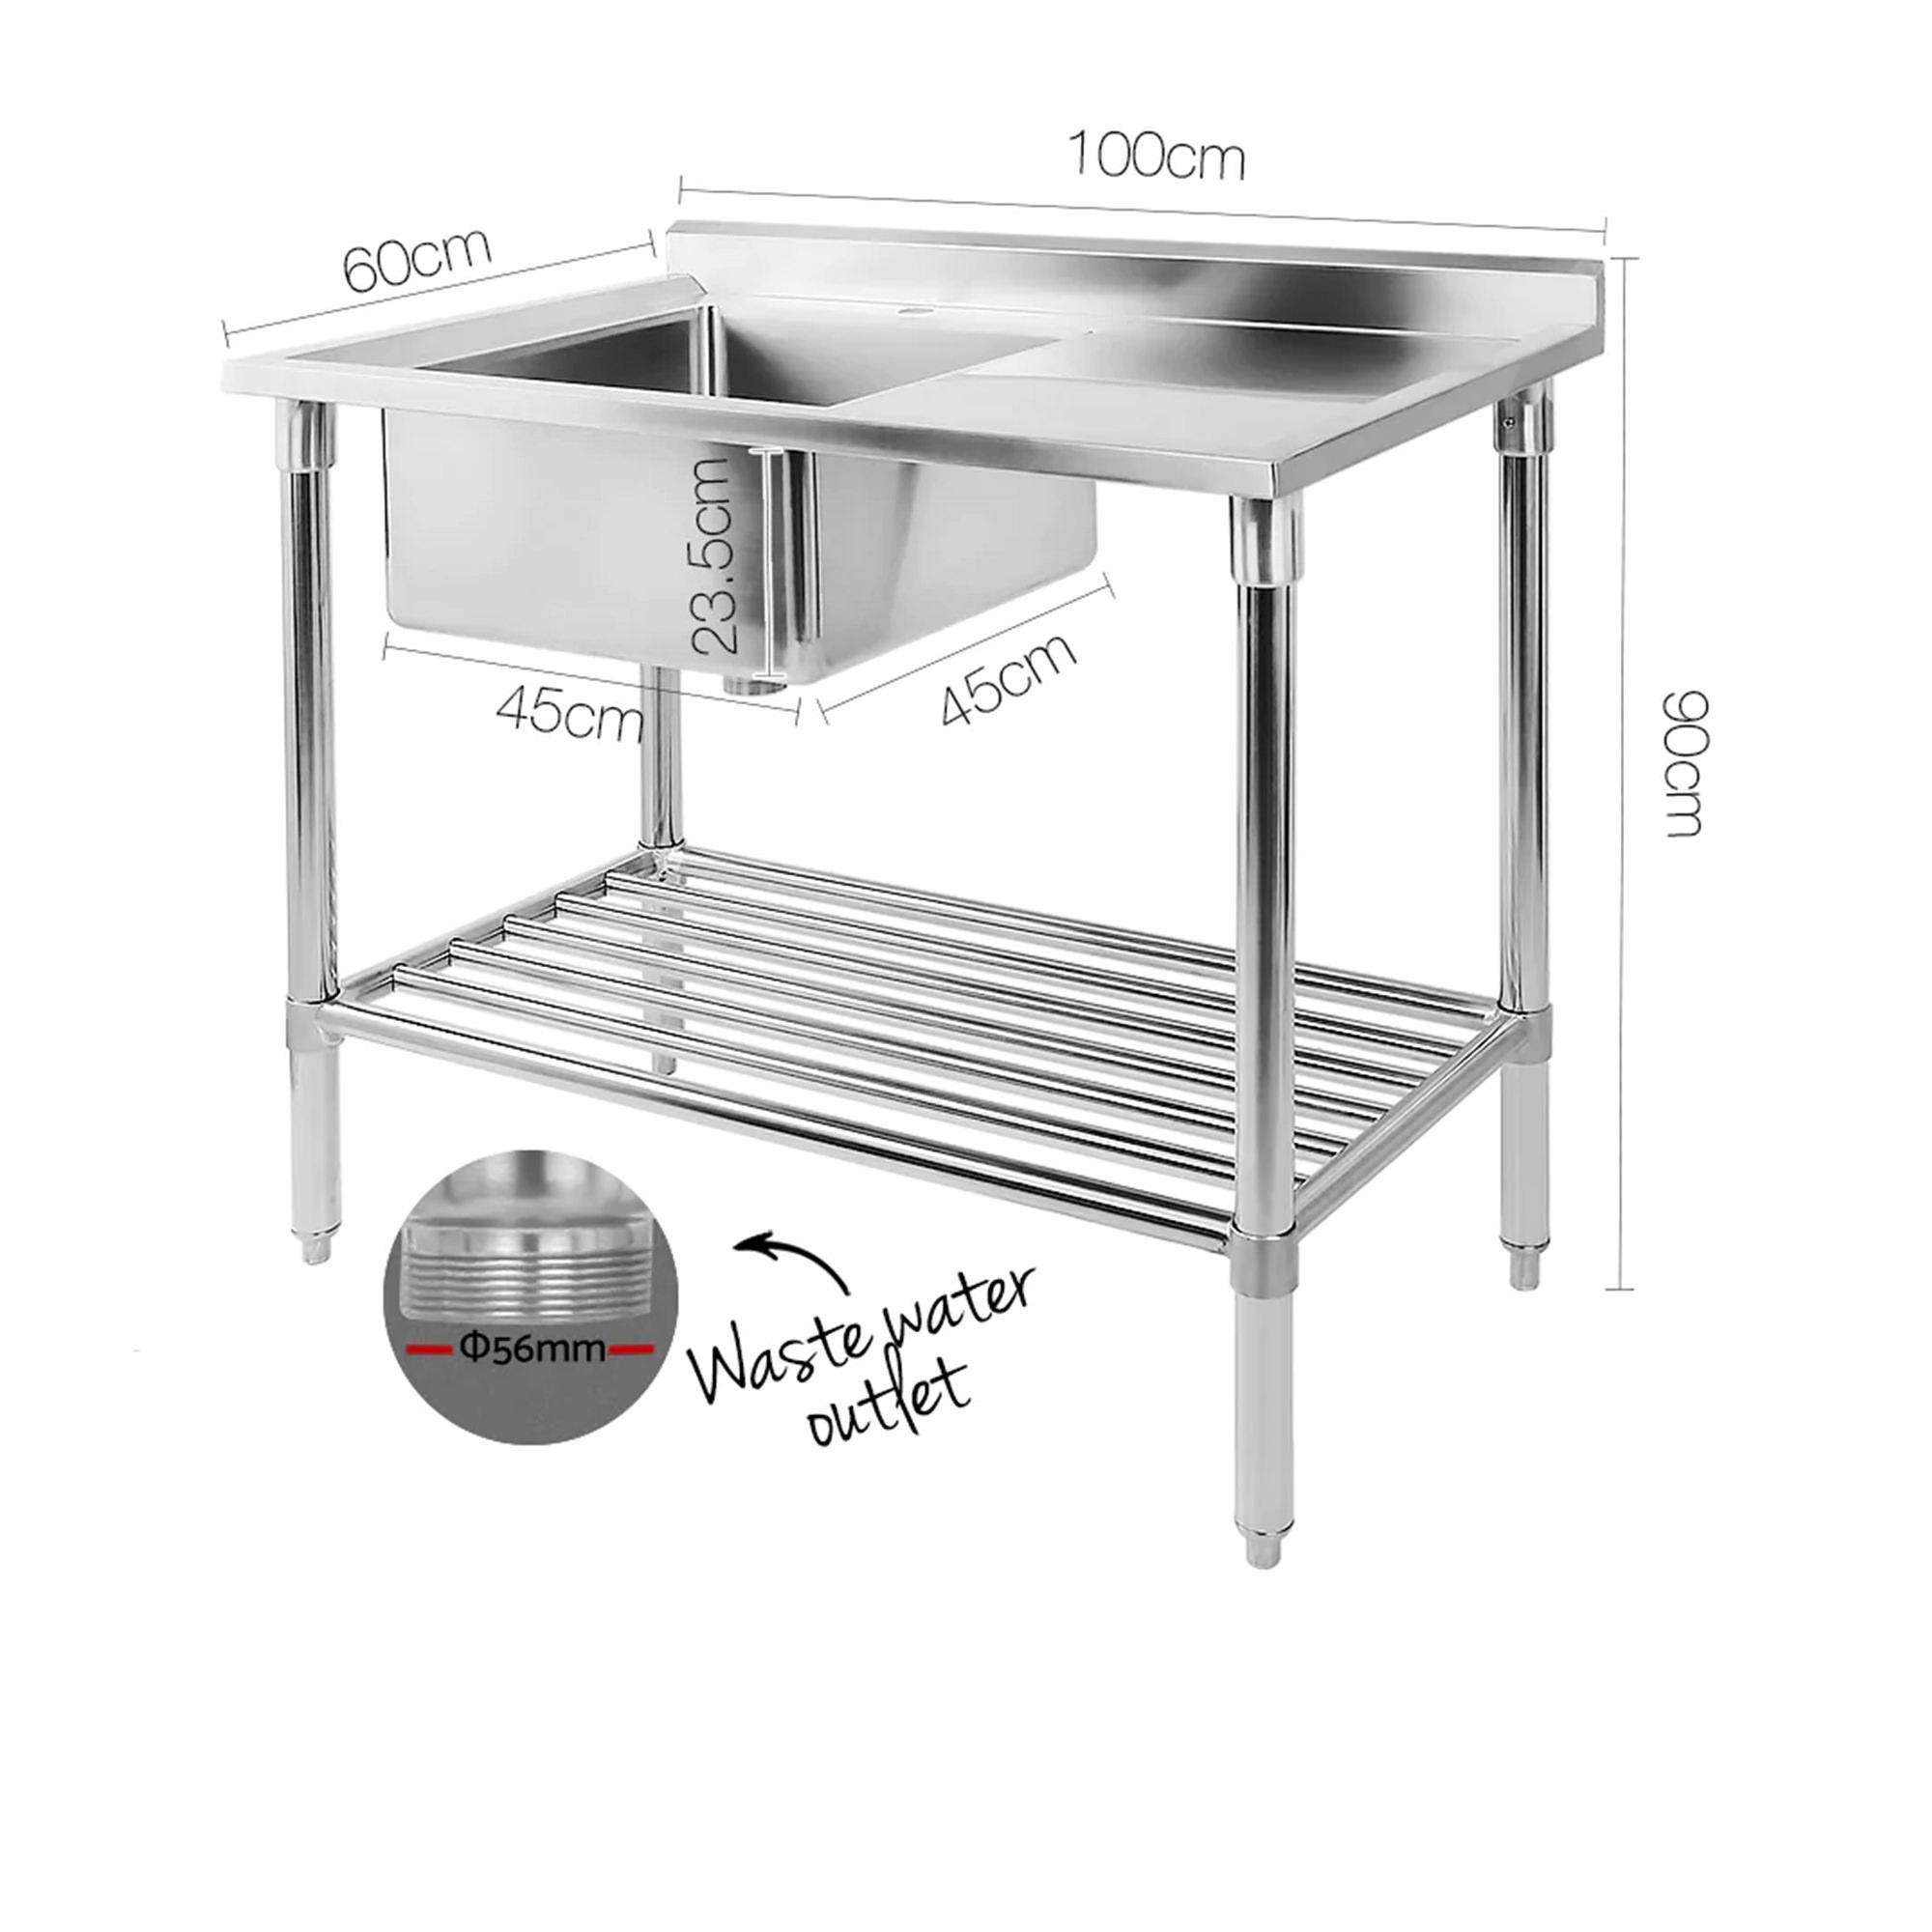 Cefito 304 Stainless Steel Kitchen Bench with Sink 100x60cm Image 3